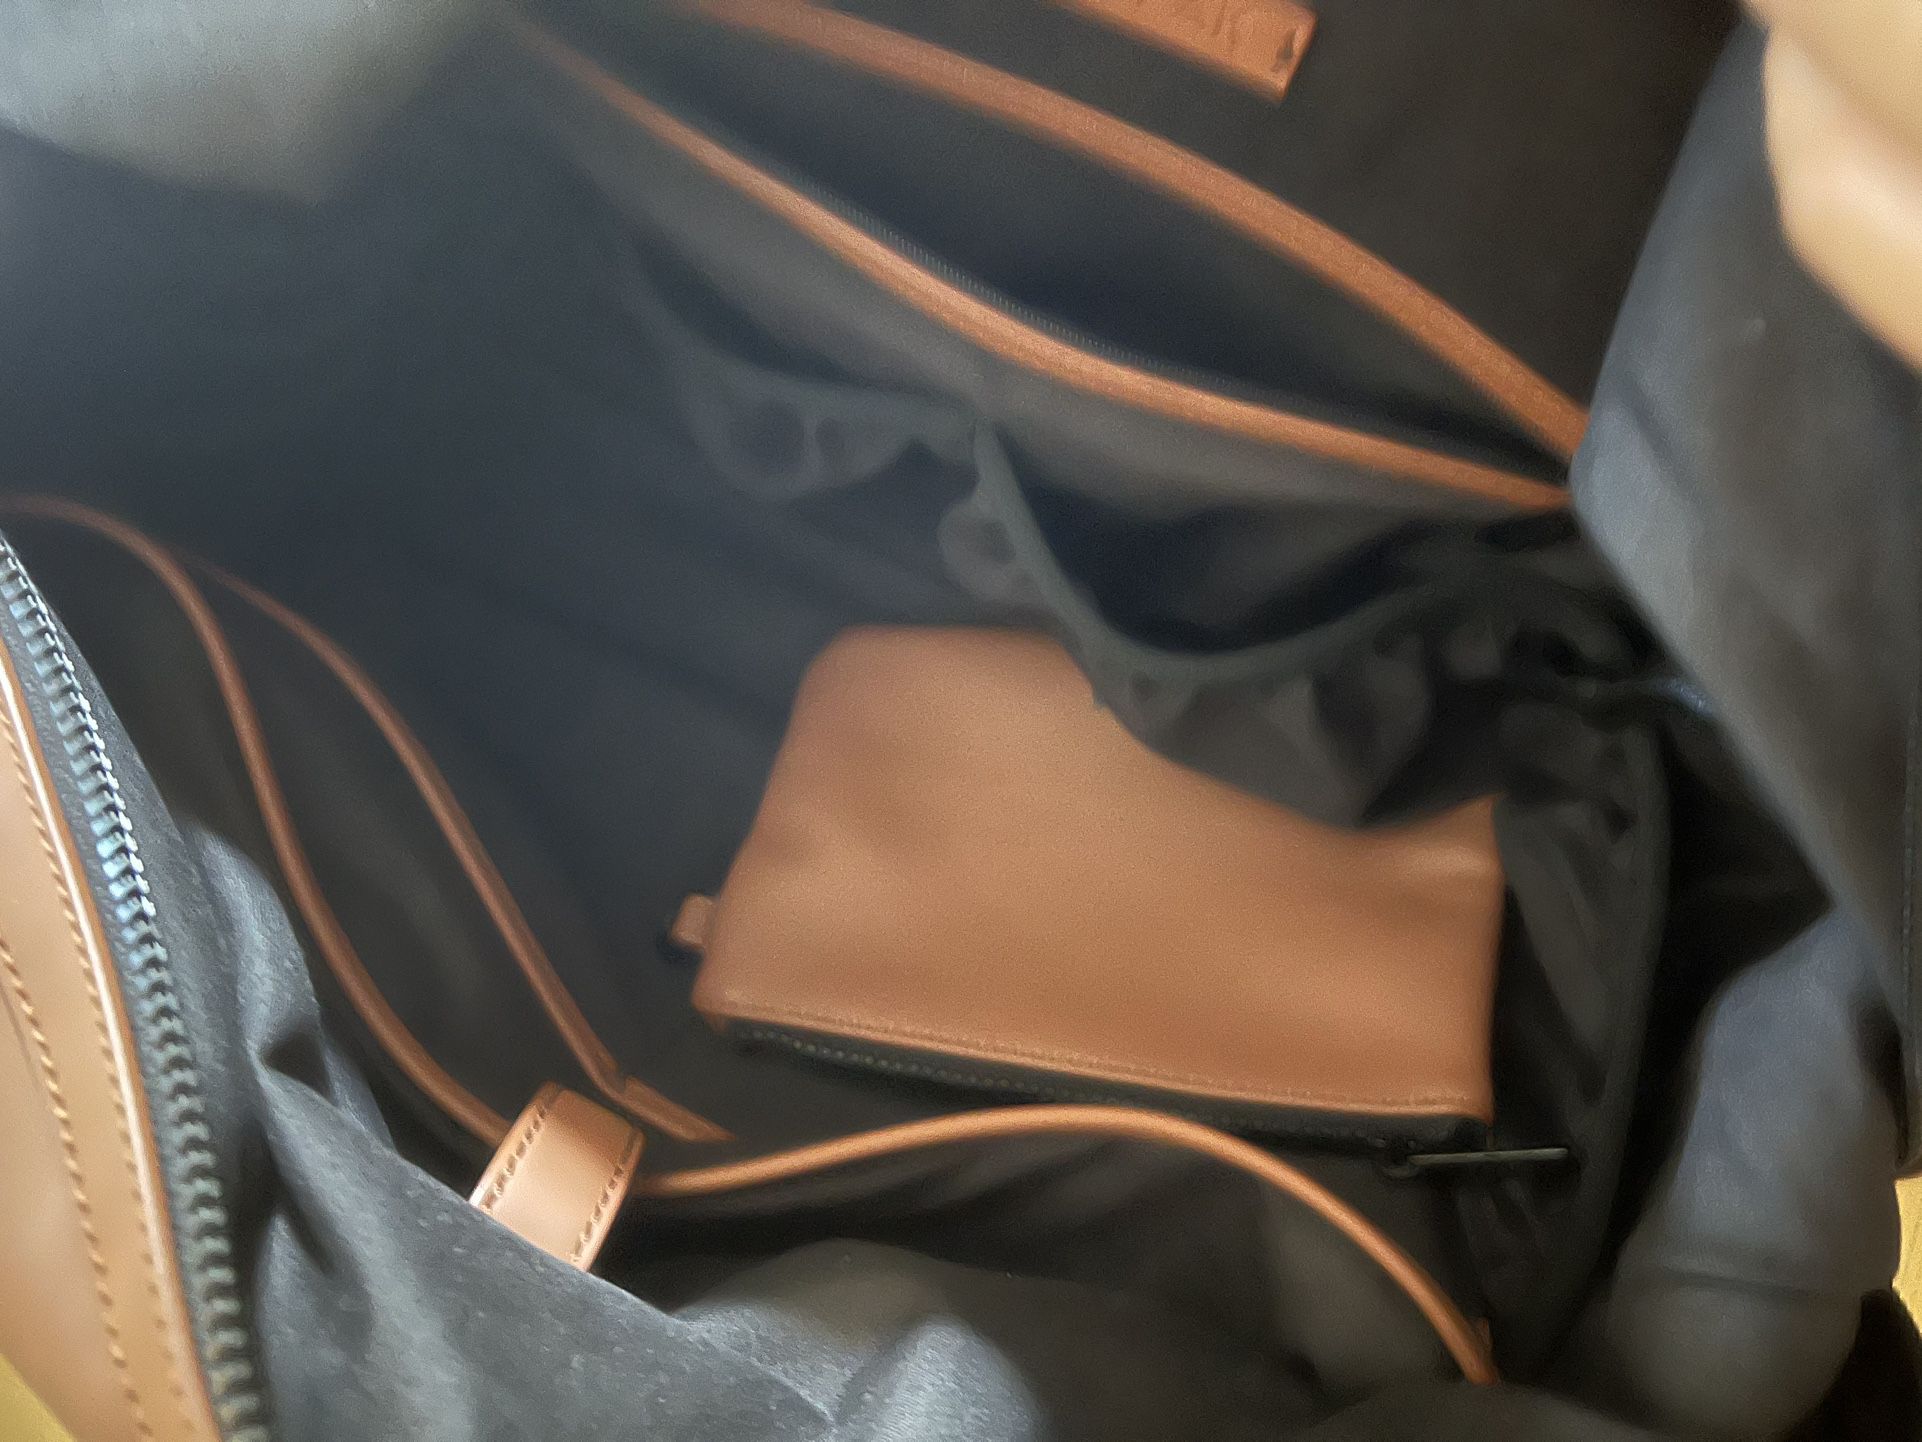 Cal pak Luka Duffle Bag for Sale in Los Angeles, CA - OfferUp